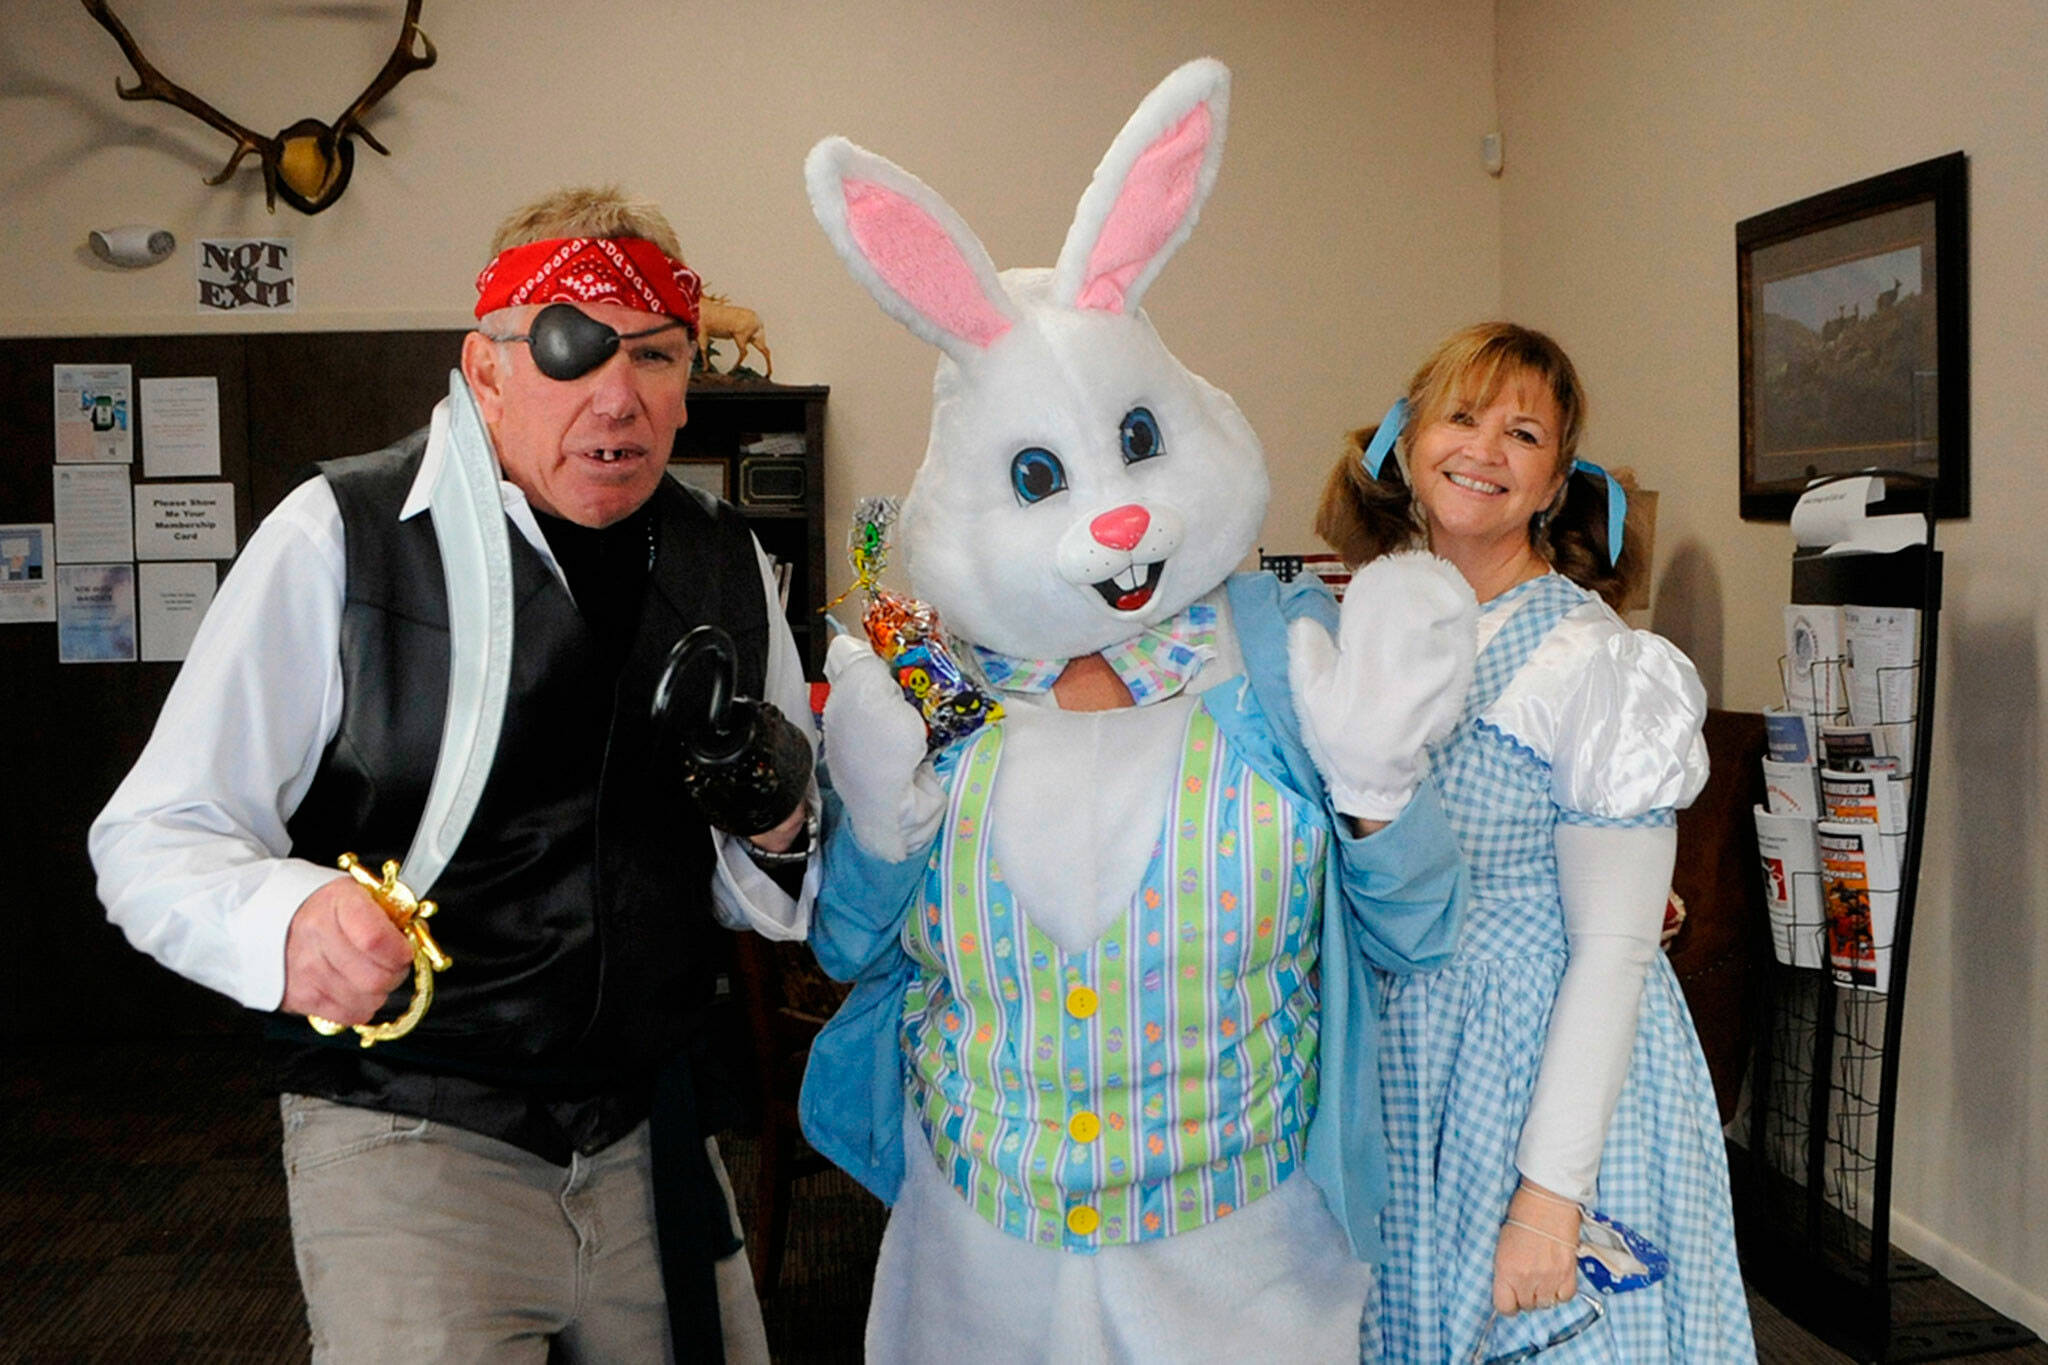 Sequim Gazette file photo by Matthew Nash/ During the Sequim Elks Lodge’s drive-thru event in 2021, Jace Cutler the pirate, Karen Lewis the Easter Bunny, and Lori Taylor as Dorothy from the “Wizard of Oz” handed out candy. The Elks offer their event again from 3-5 p.m. on Halloween.